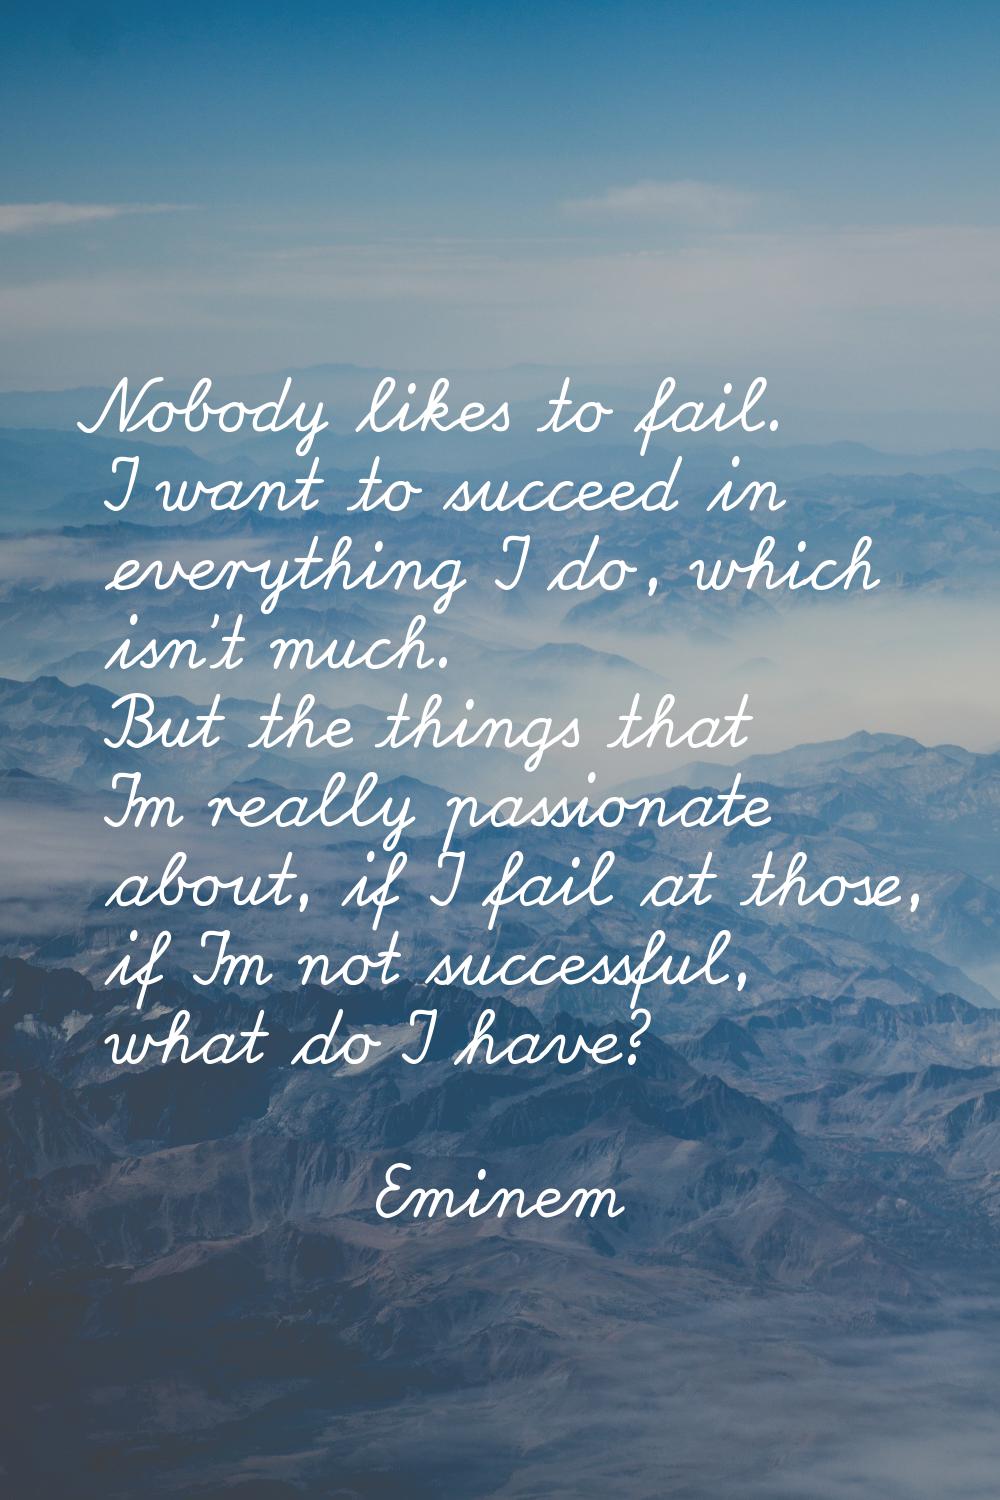 Nobody likes to fail. I want to succeed in everything I do, which isn't much. But the things that I